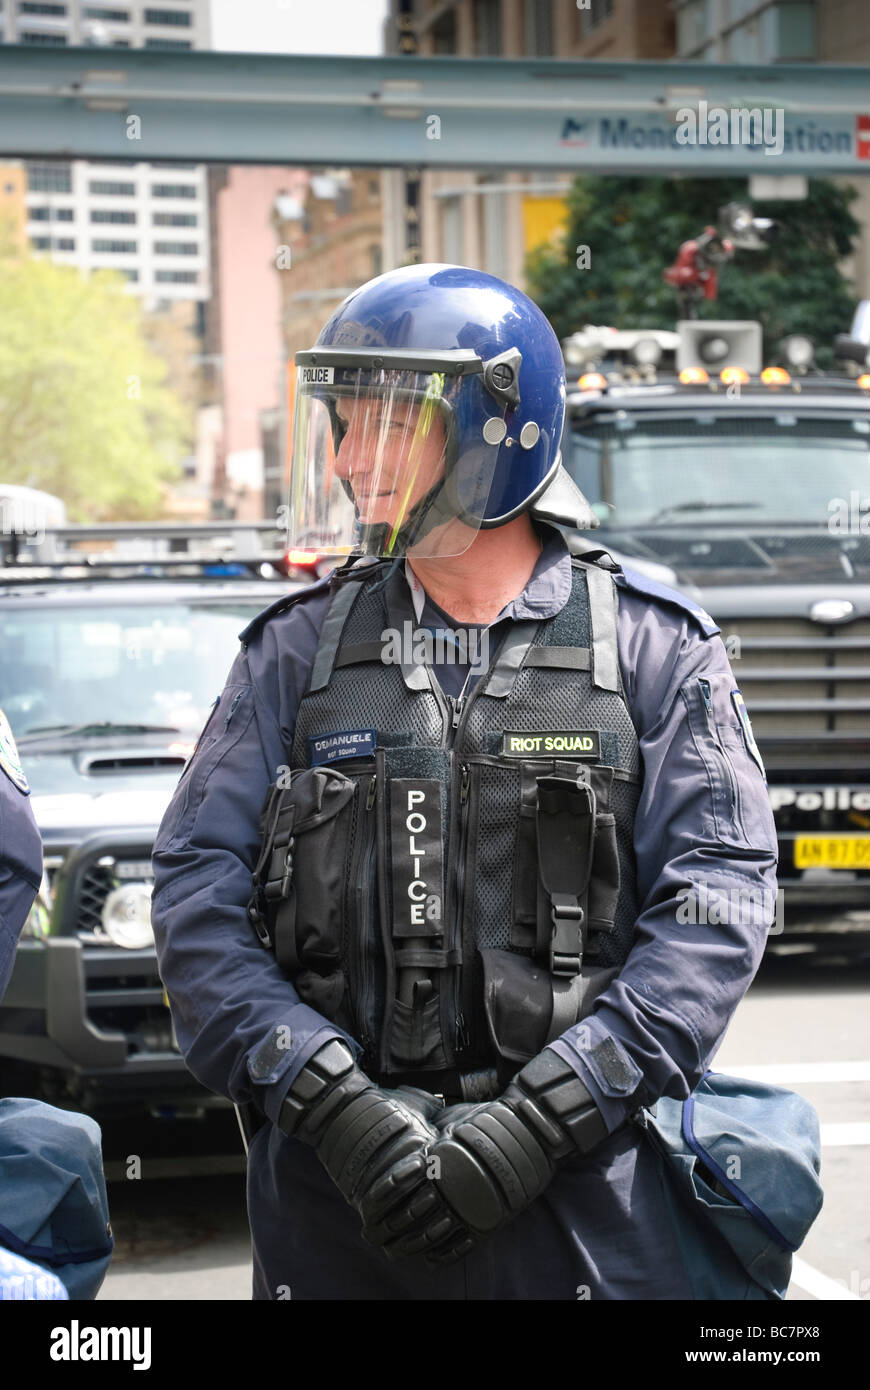 Riot and public order squad officer takes part in a show of force during protests for the APEC summit, Sydney, Australia. Policeman in full riot gear. Stock Photo